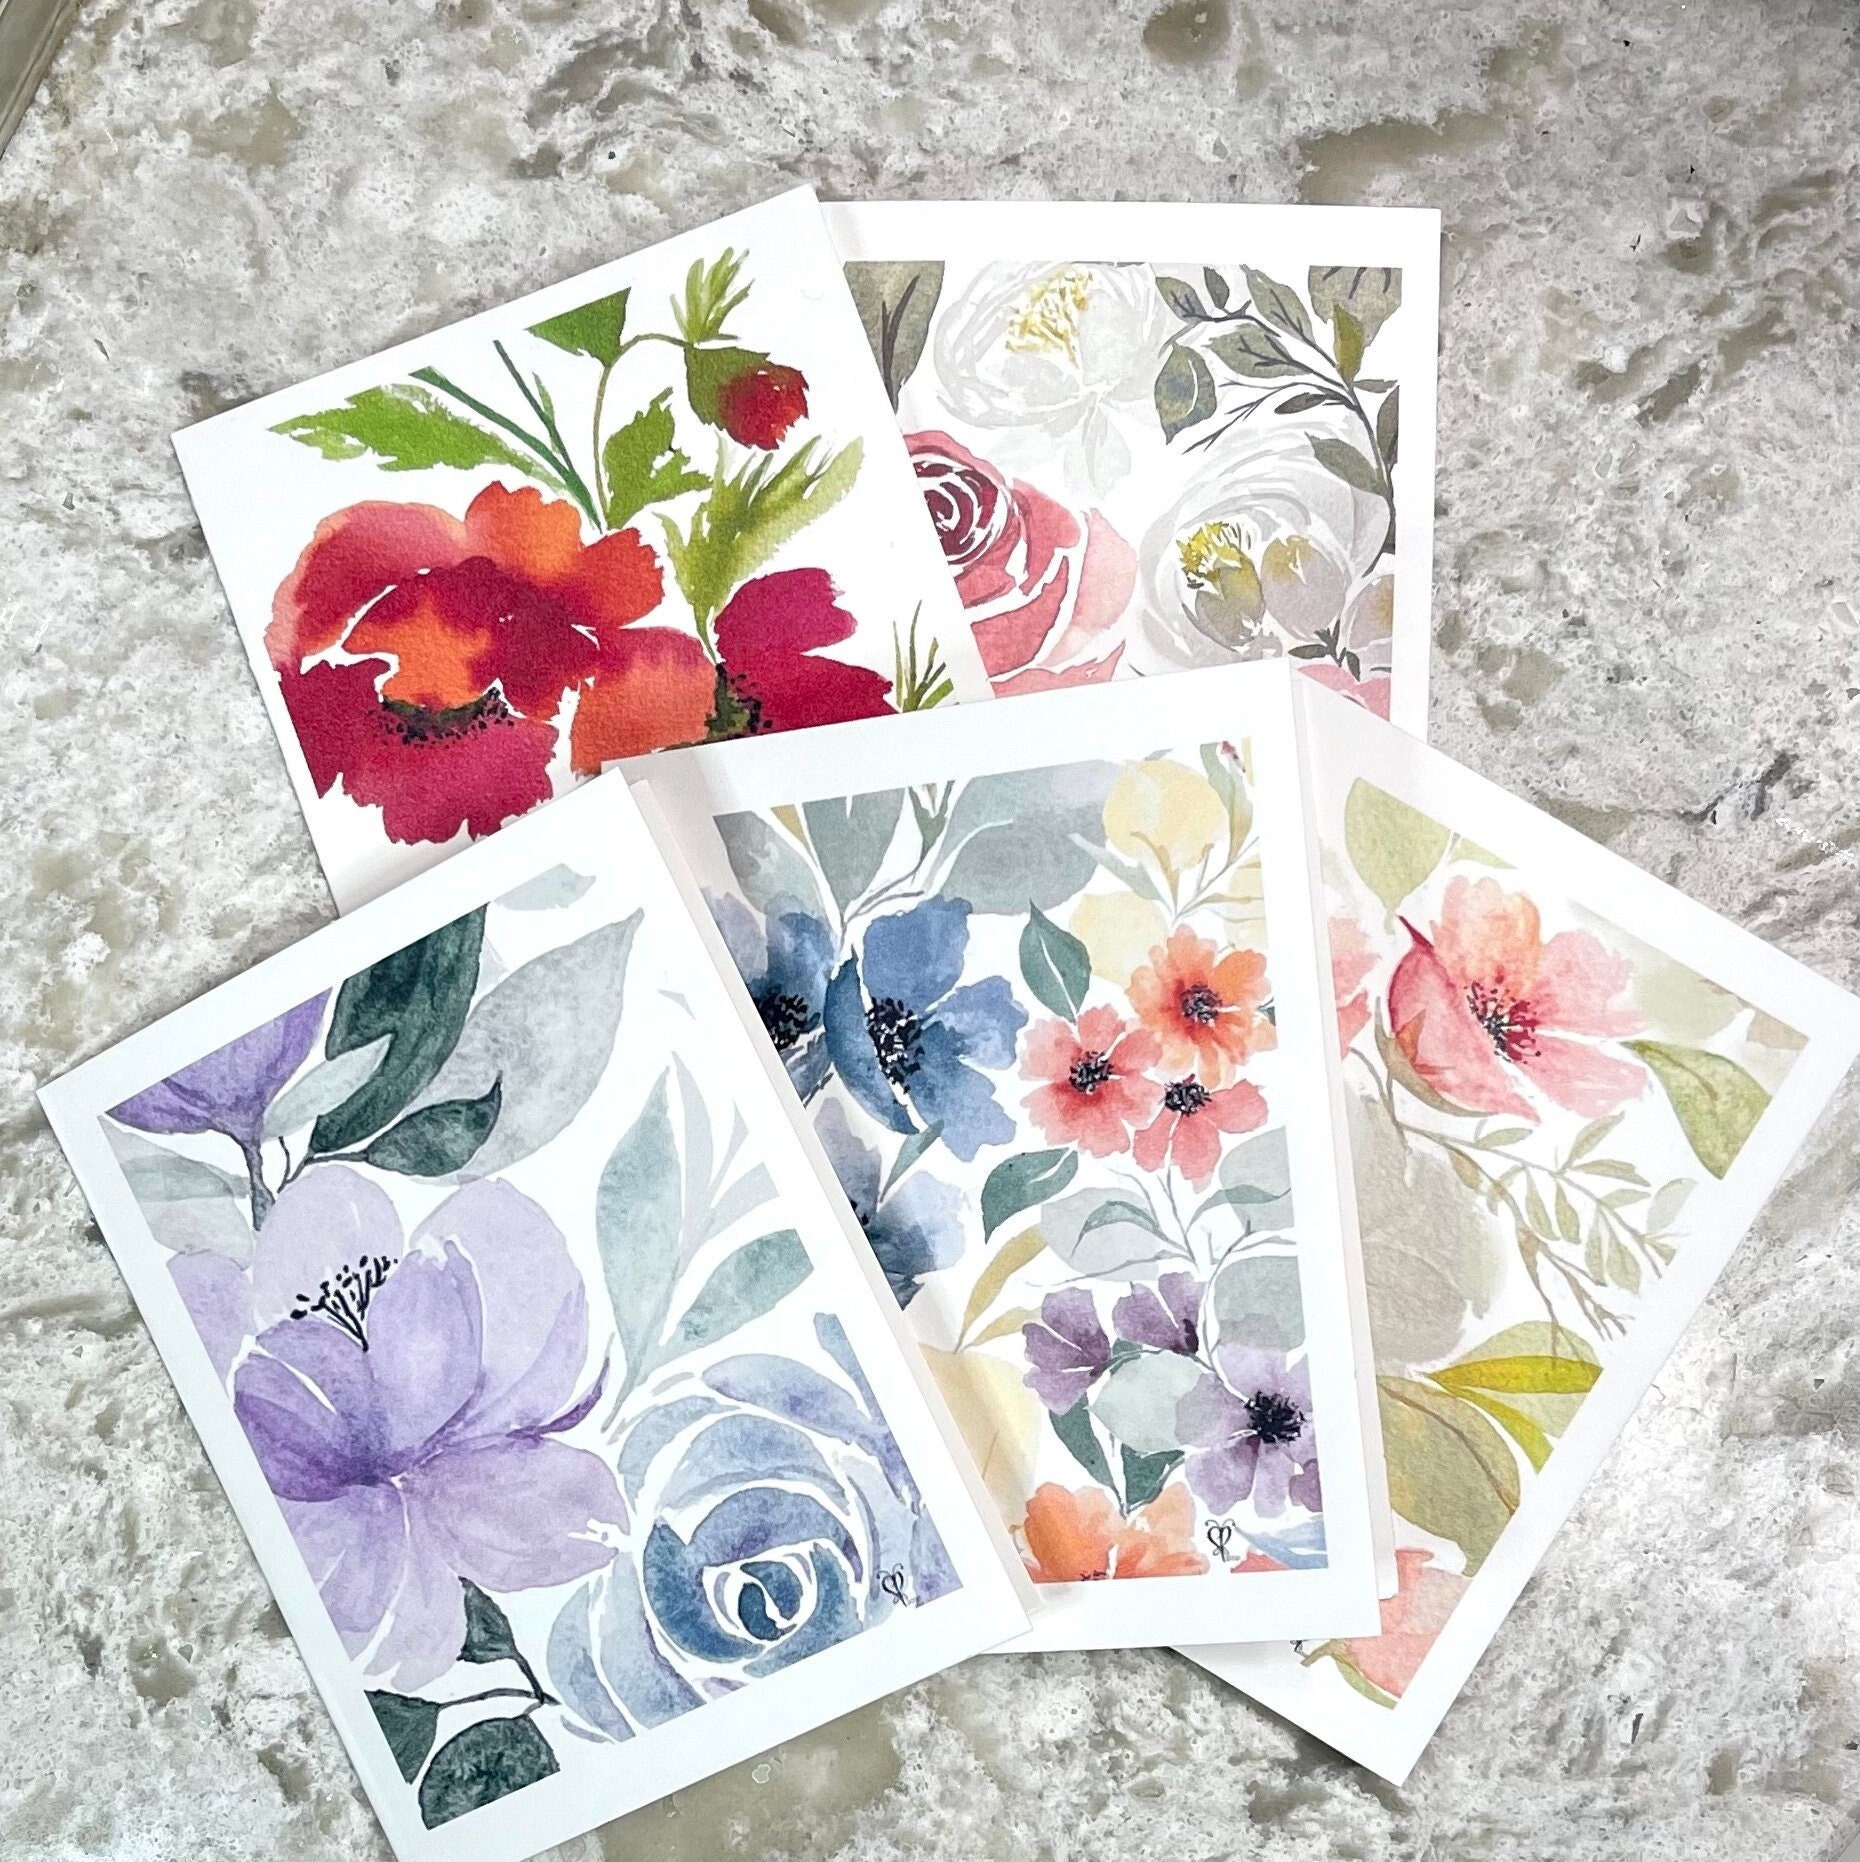 wildflower card set . watercolor wild flowers note cards . floral, nature,  botanical . blank note cards . folded stationery stationary set